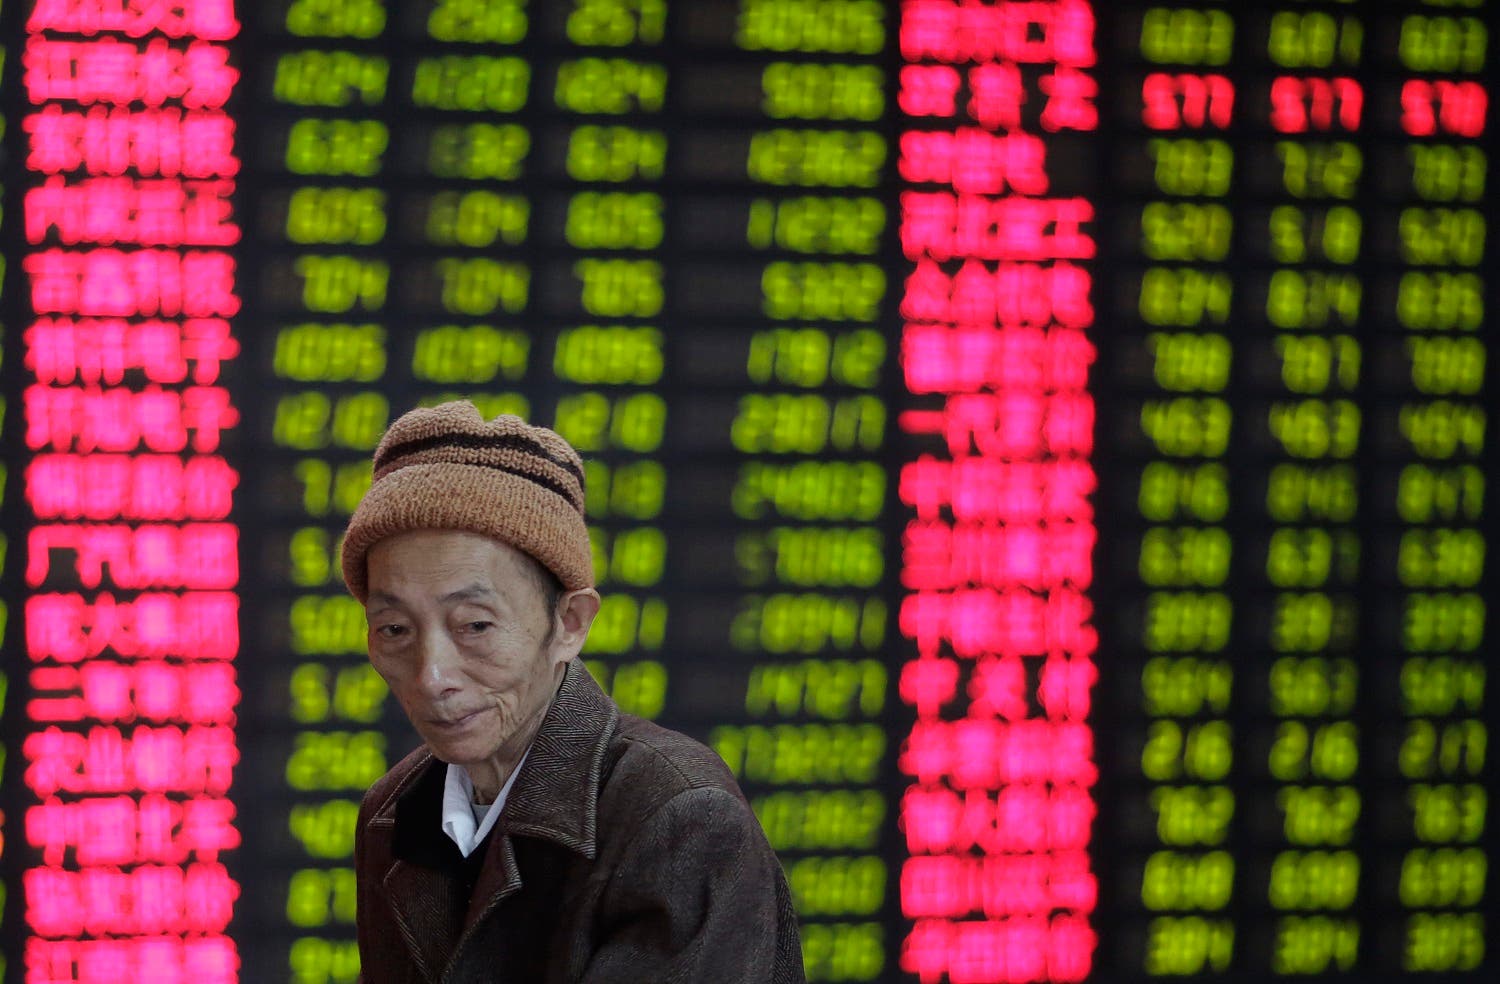 An investor looks at the stock price monitor at a private securities company in Shanghai, China, Thursday, Nov. 8, 2012. (AP)